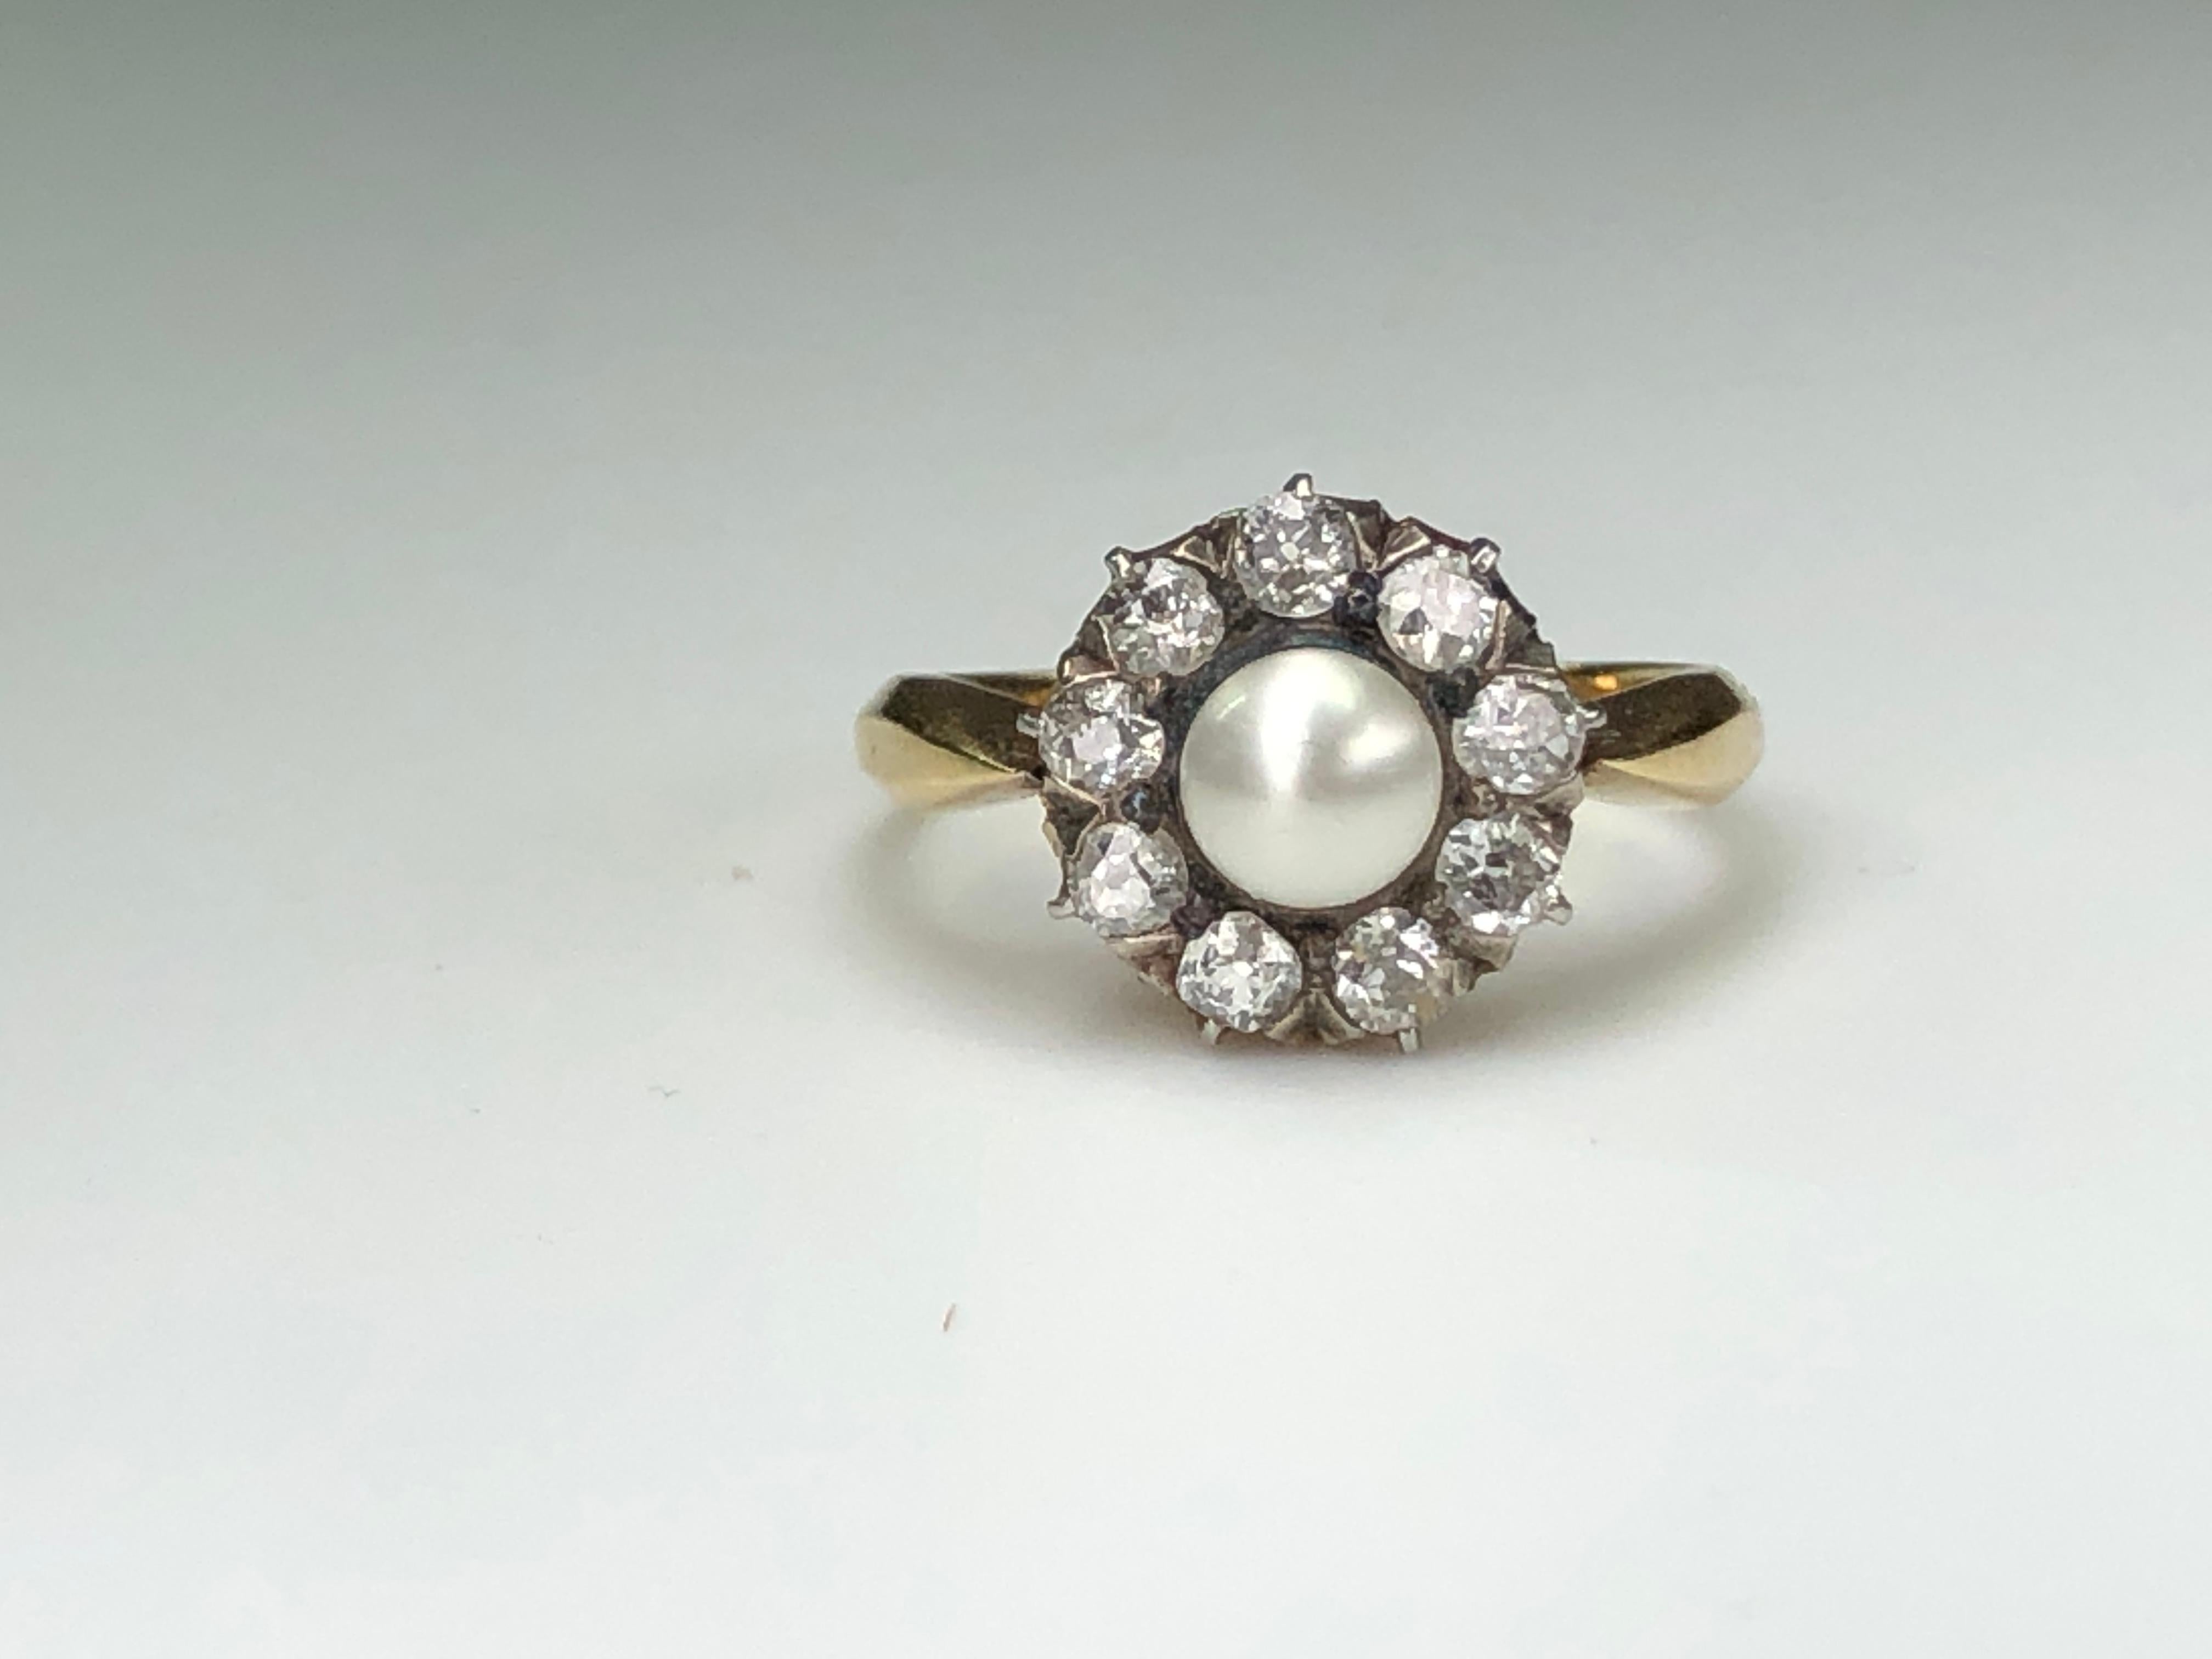 A natural pearl and diamond cluster ring, the central bouton natural pearl surrounded by nine old brilliant-cut diamonds, estimated to weigh a total of 0.9 carats, set in 18K gold mount with knife edge shank.  Circa 1890.

It is currently a size L